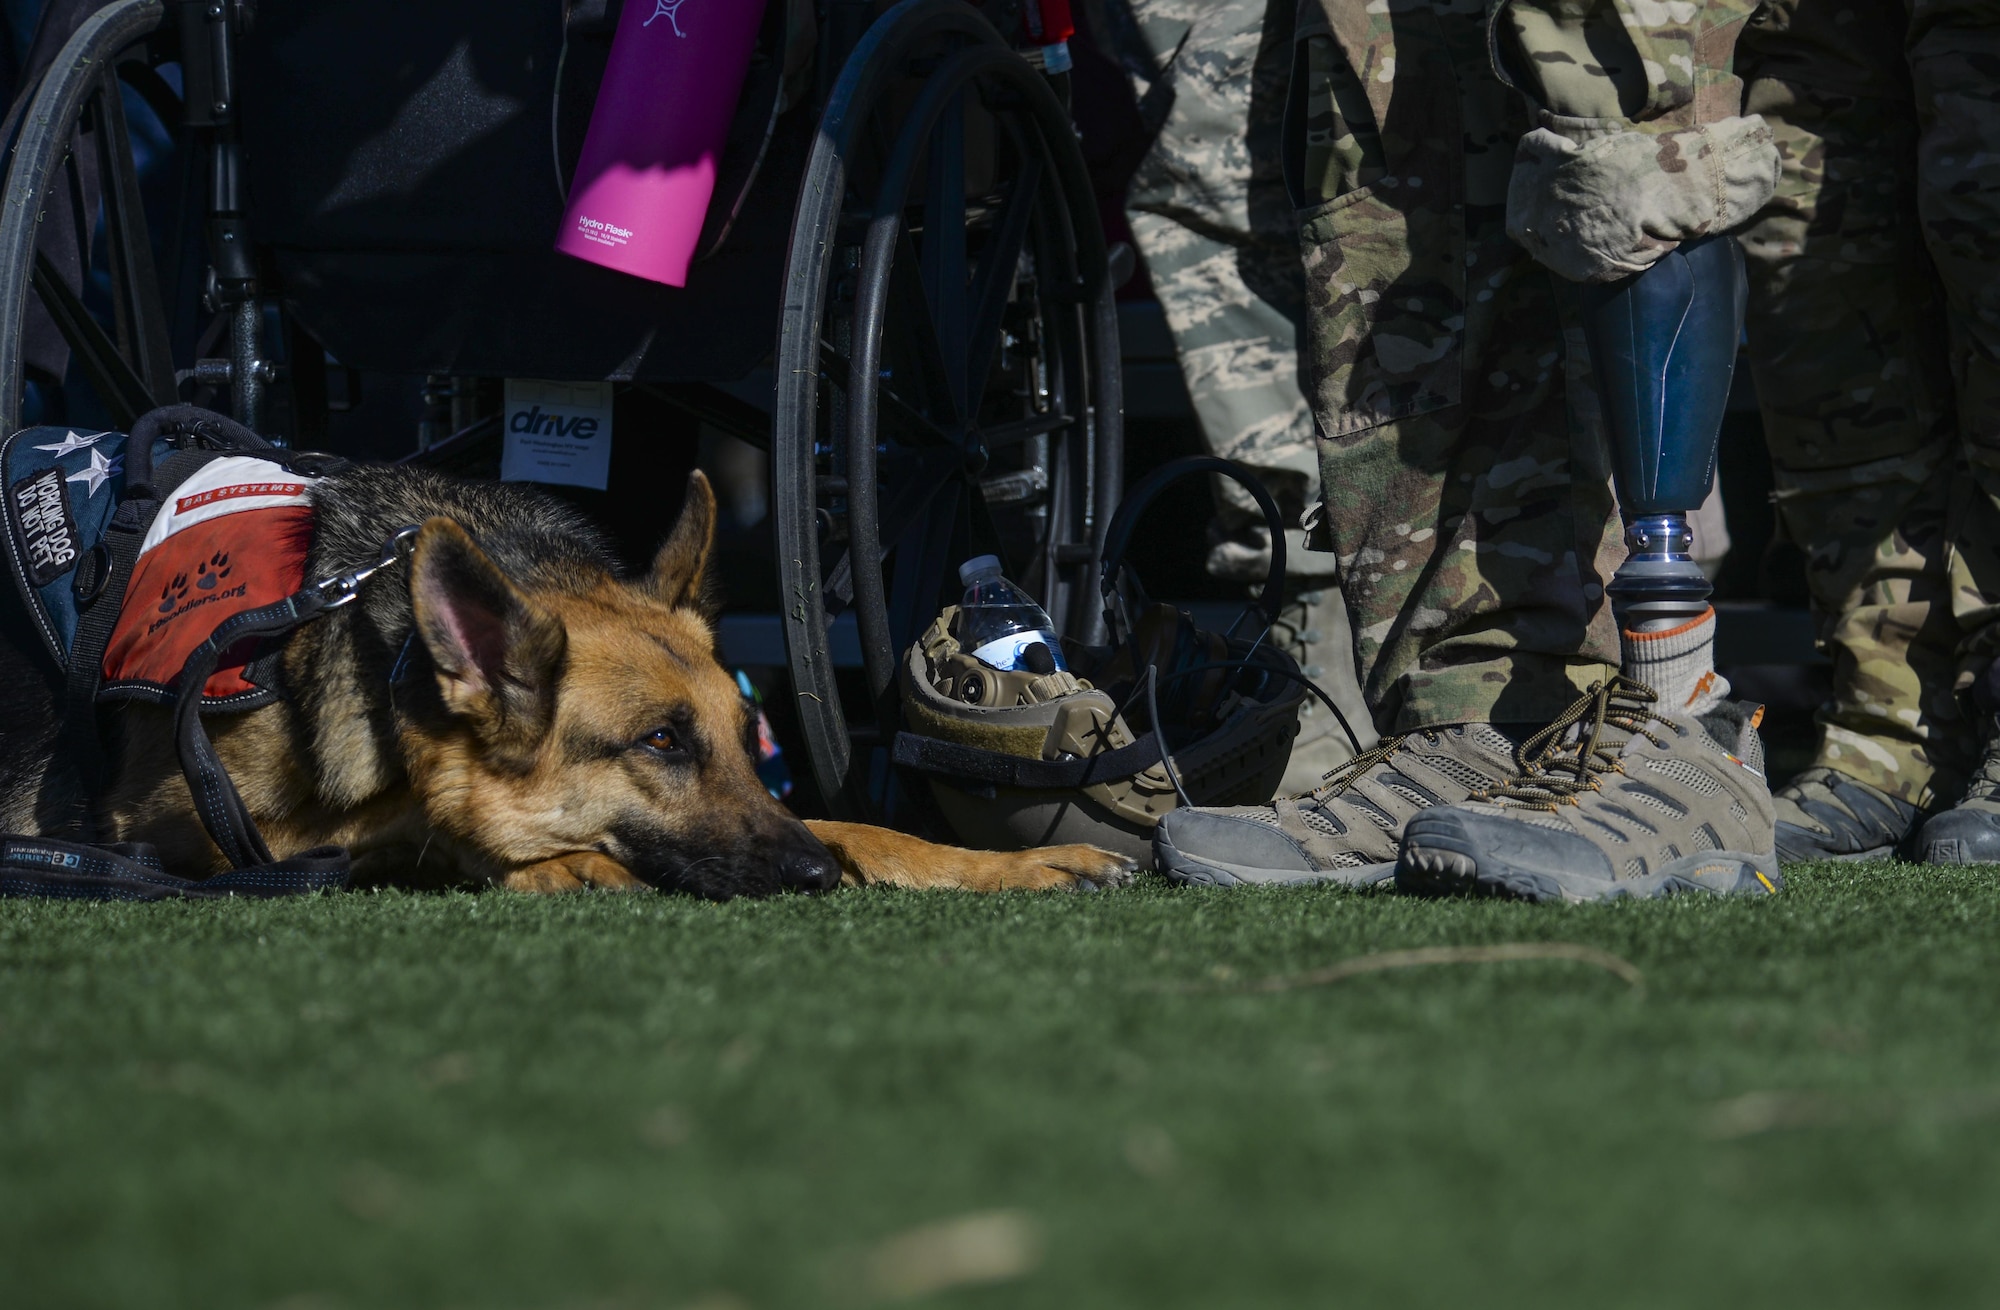 Staff Sgt. August O’Neill stands with his working dog during the opening ceremony of the 2016 Air Force Wounded Warrior Trials Feb. 26, at Nellis Air Force Base. Wounded warriors are encouraged to come out and try adaptive sports as a way to begin a new chapter within their life. (U.S. Air Force photo by Airman 1st Class Kevin Tanenbaum)